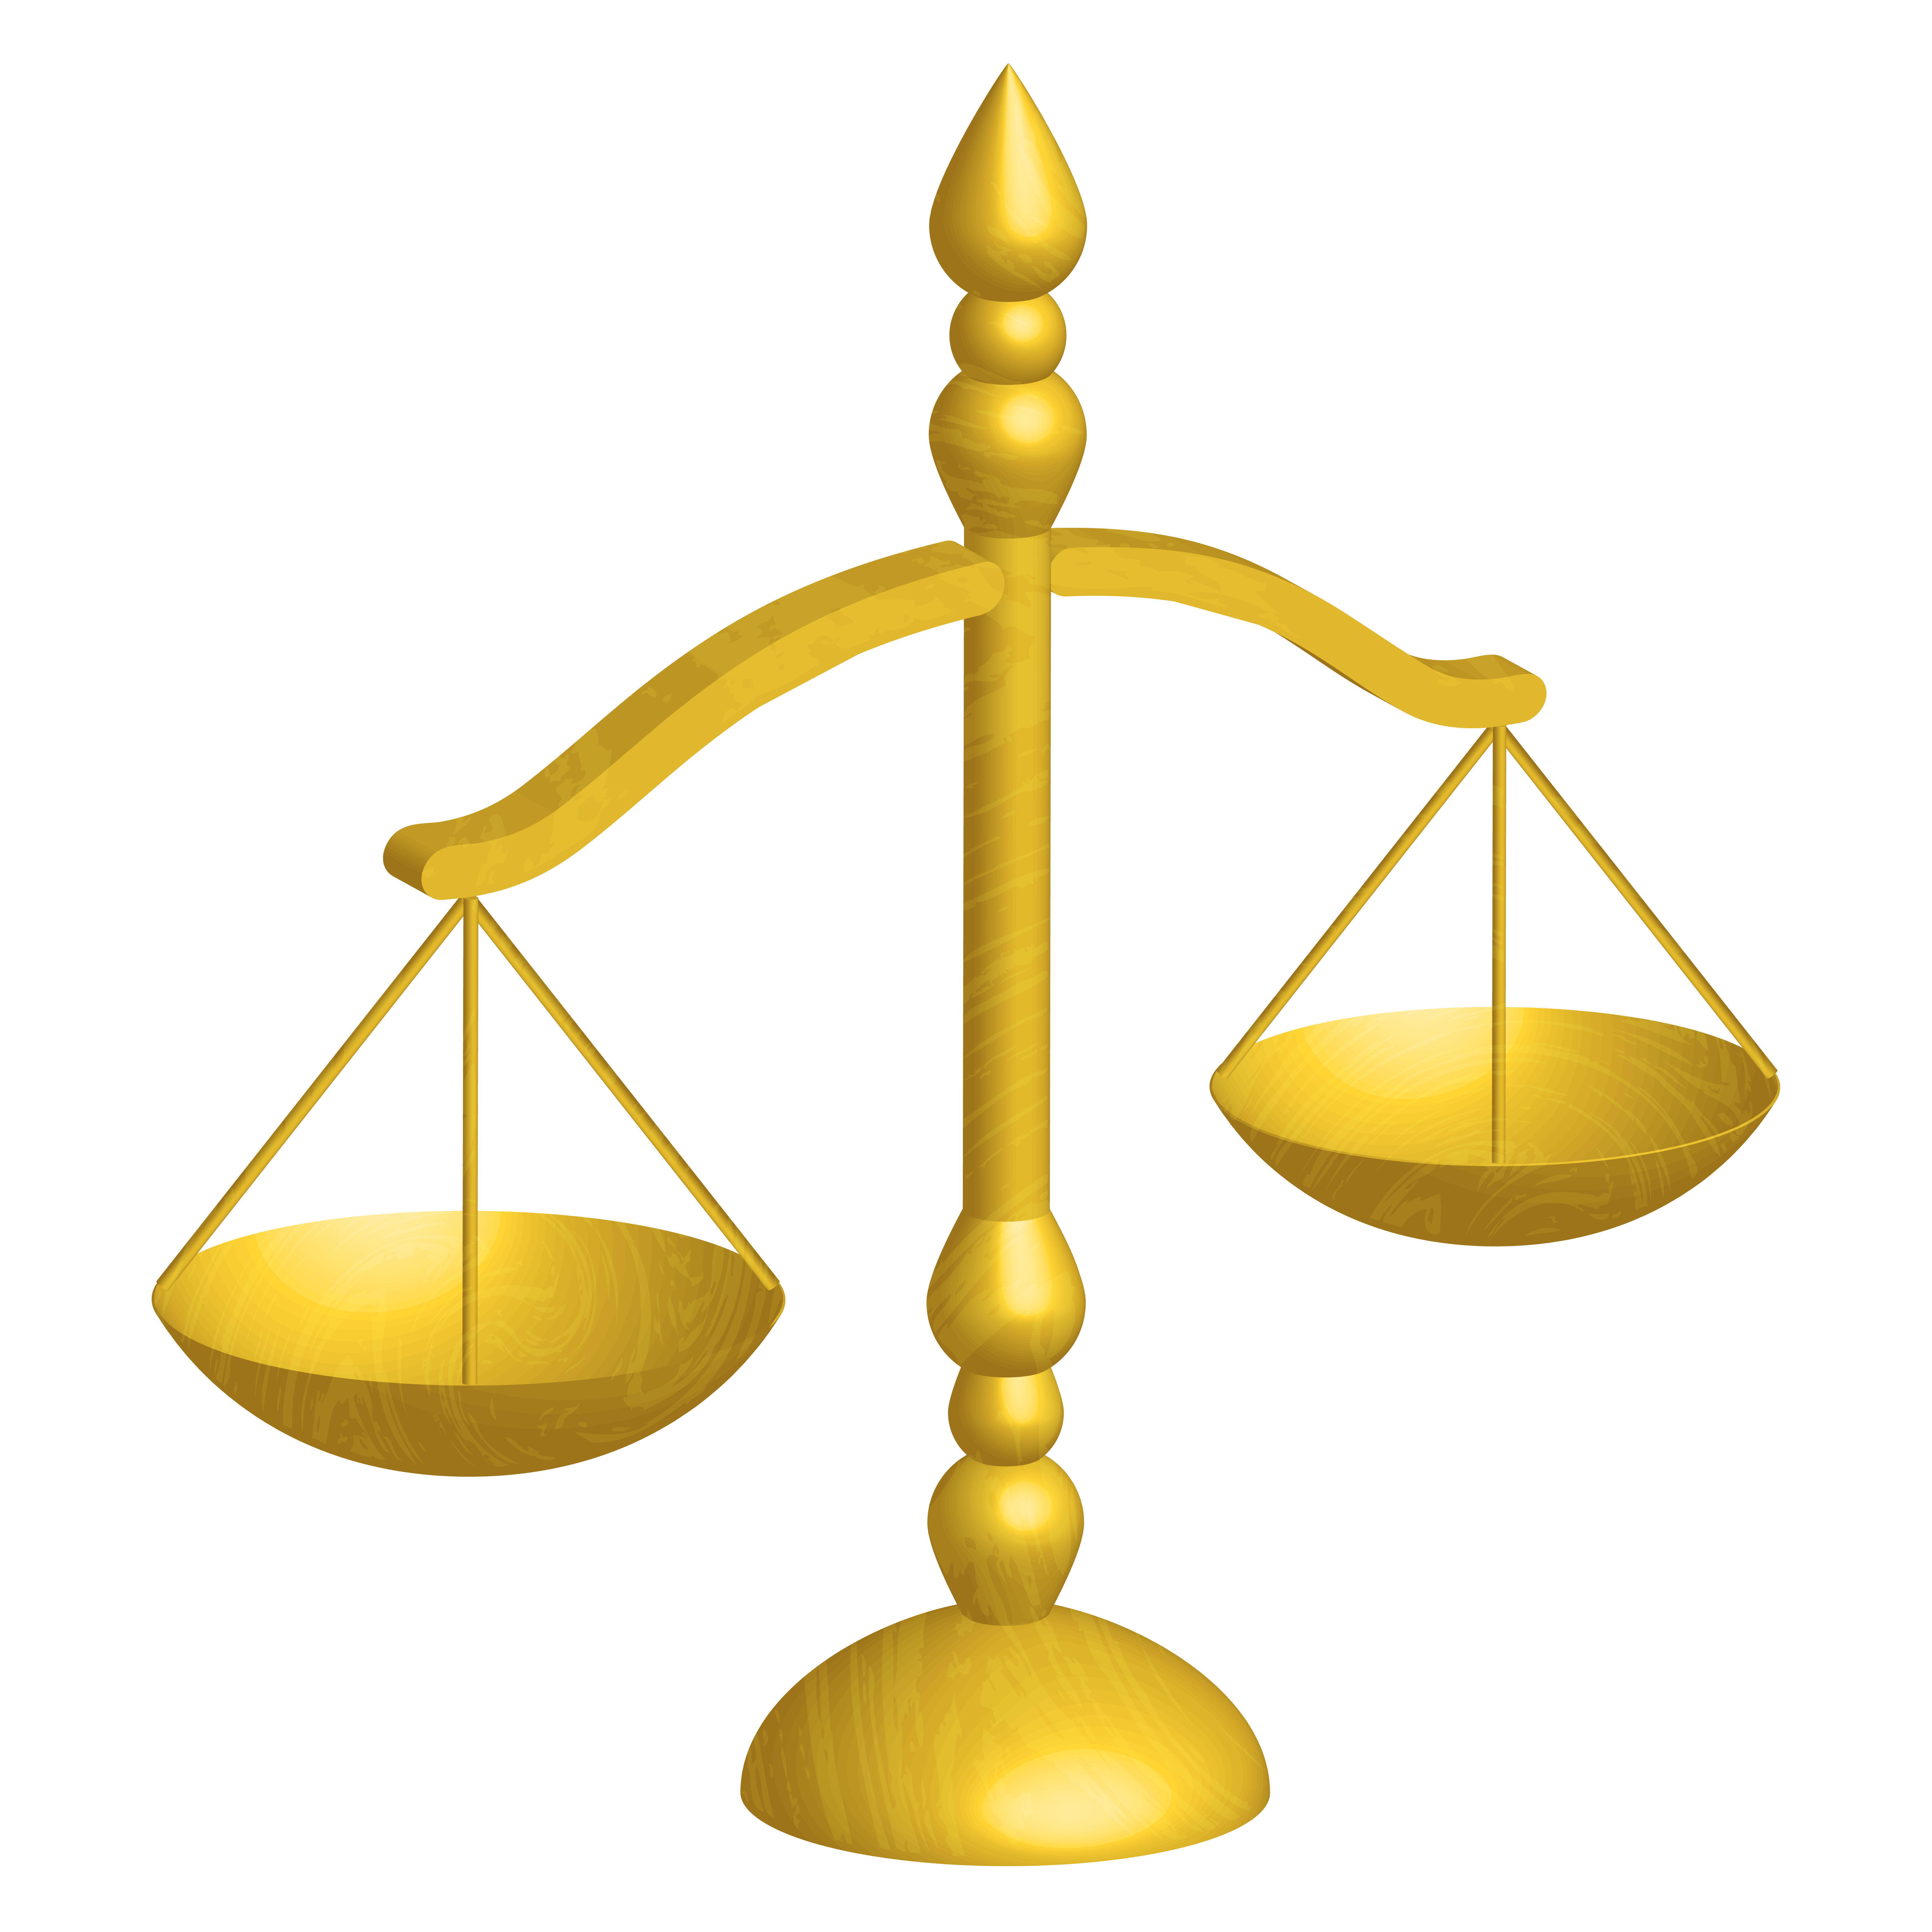 ... Scales Of Justice Clip Art - clipartall ...